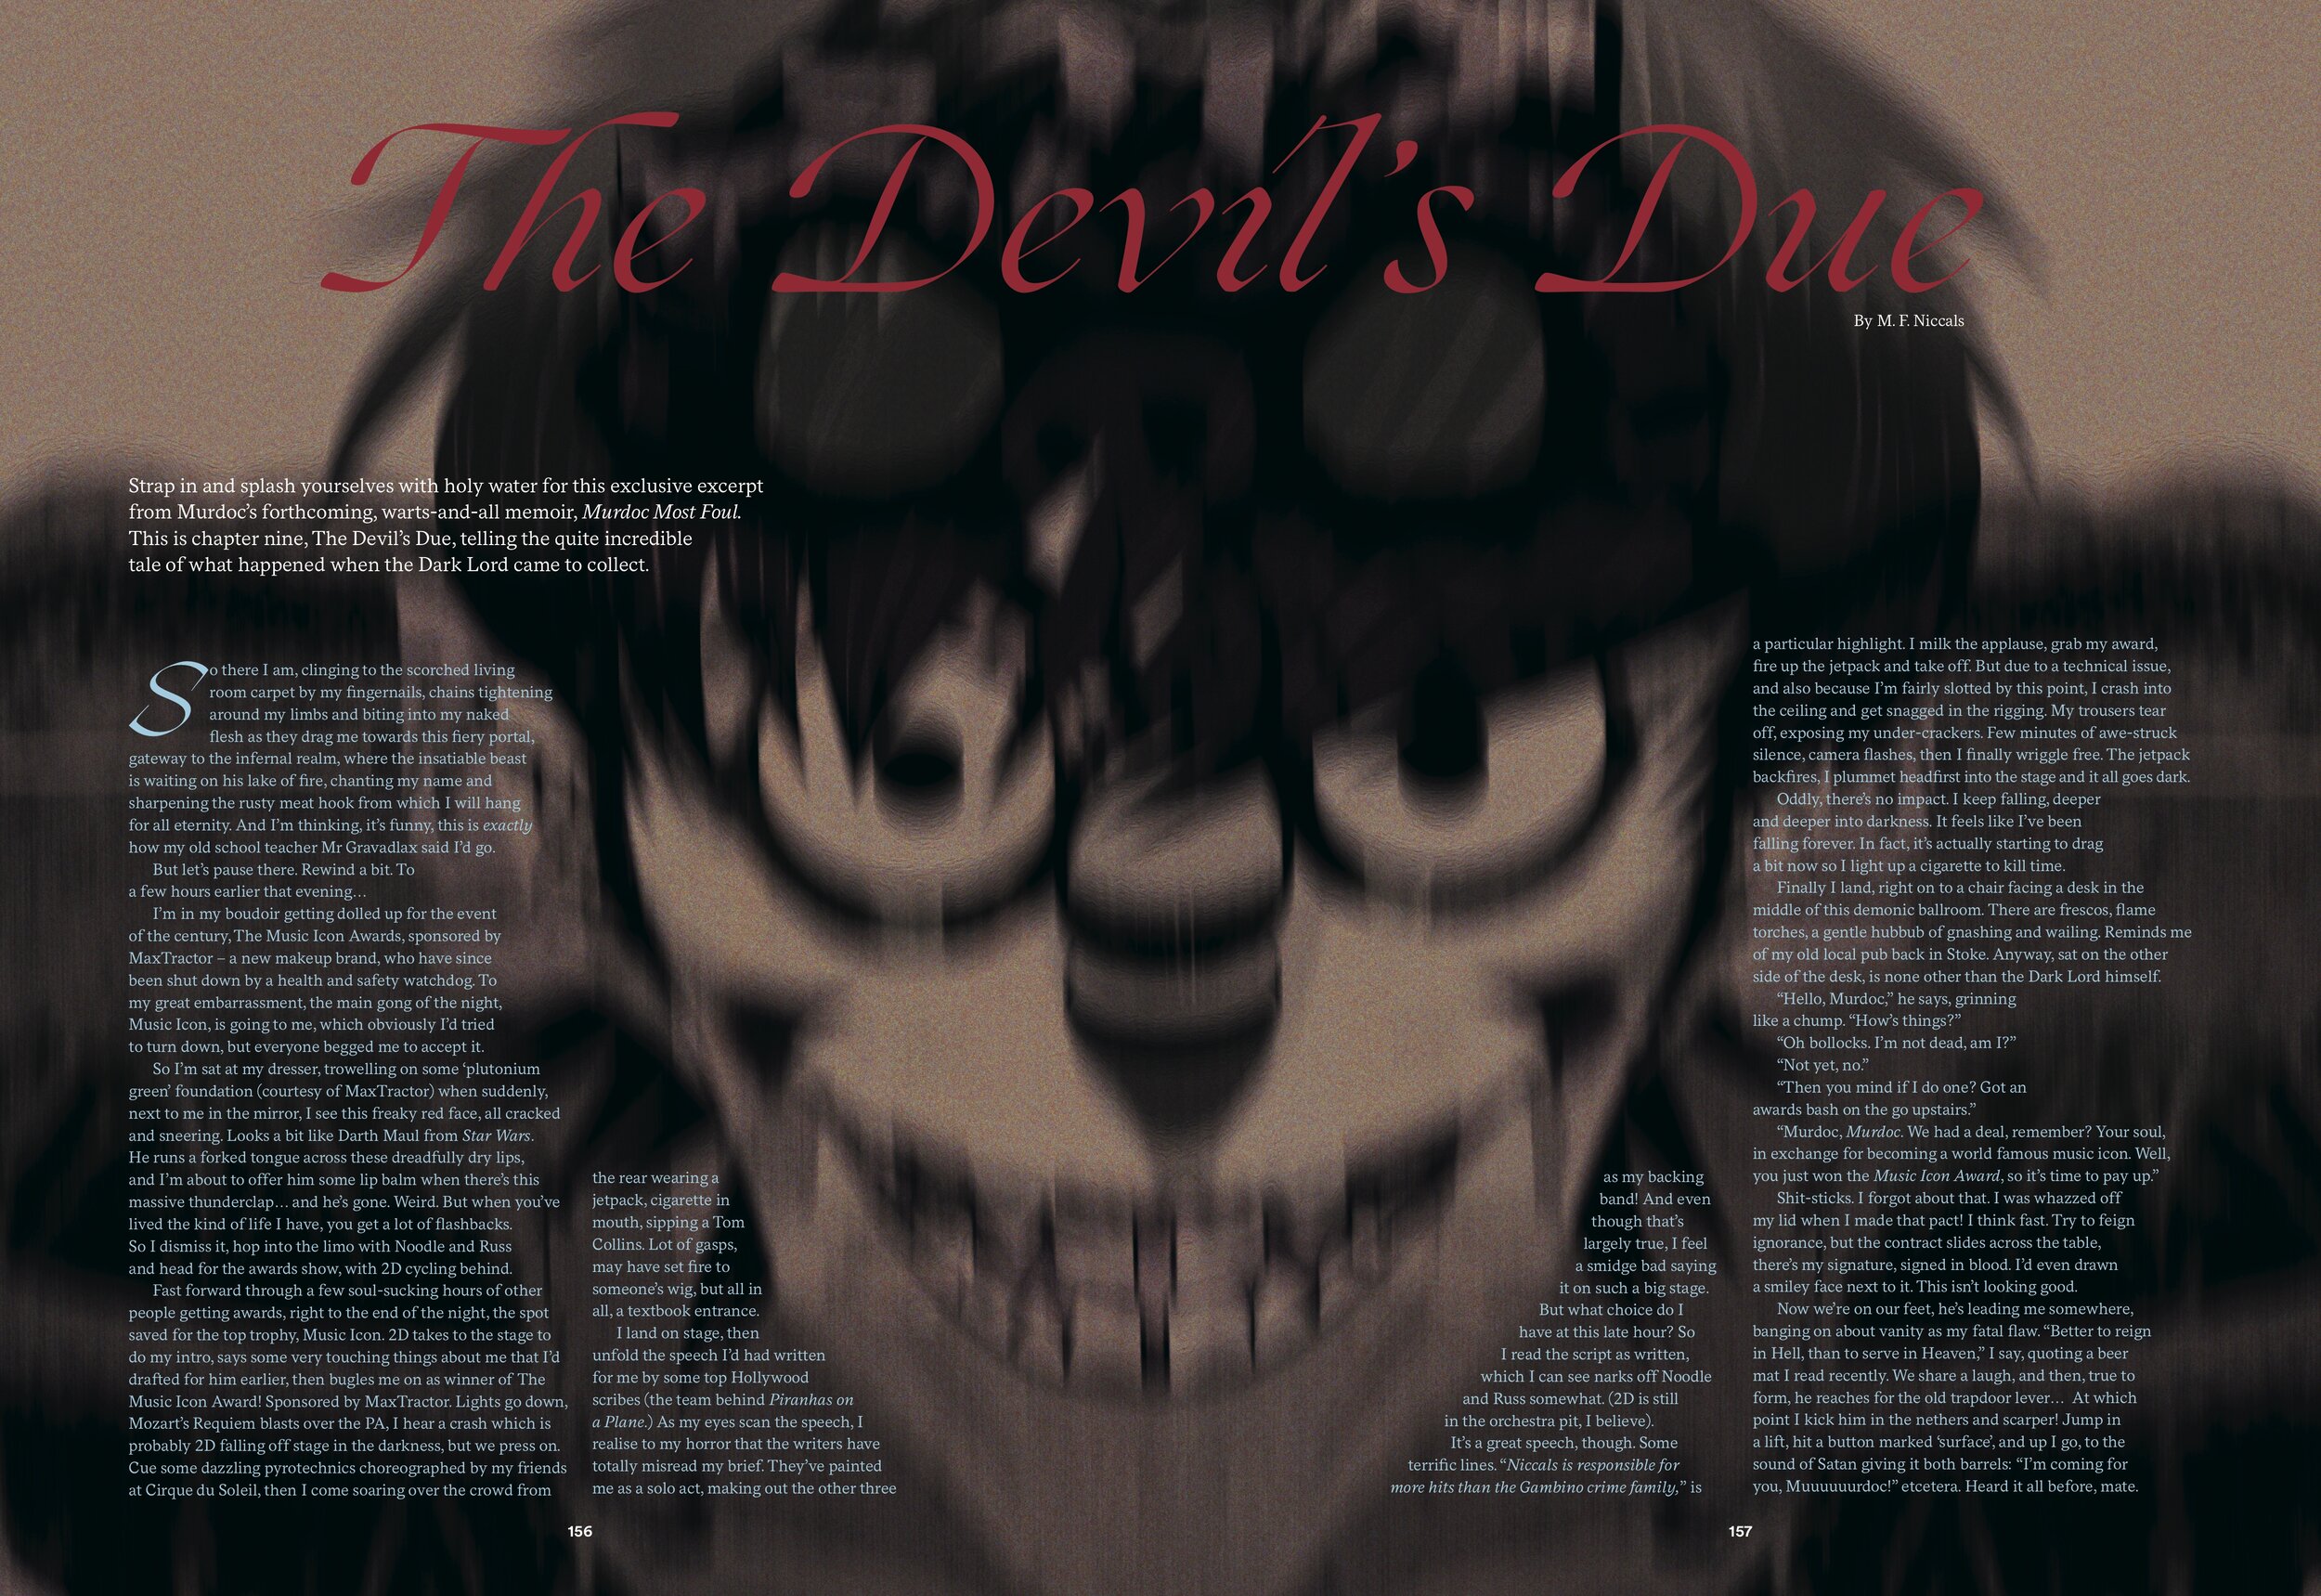 Part 1 of Murdoc's yarn about the time The Devil came to collect his immortal soul